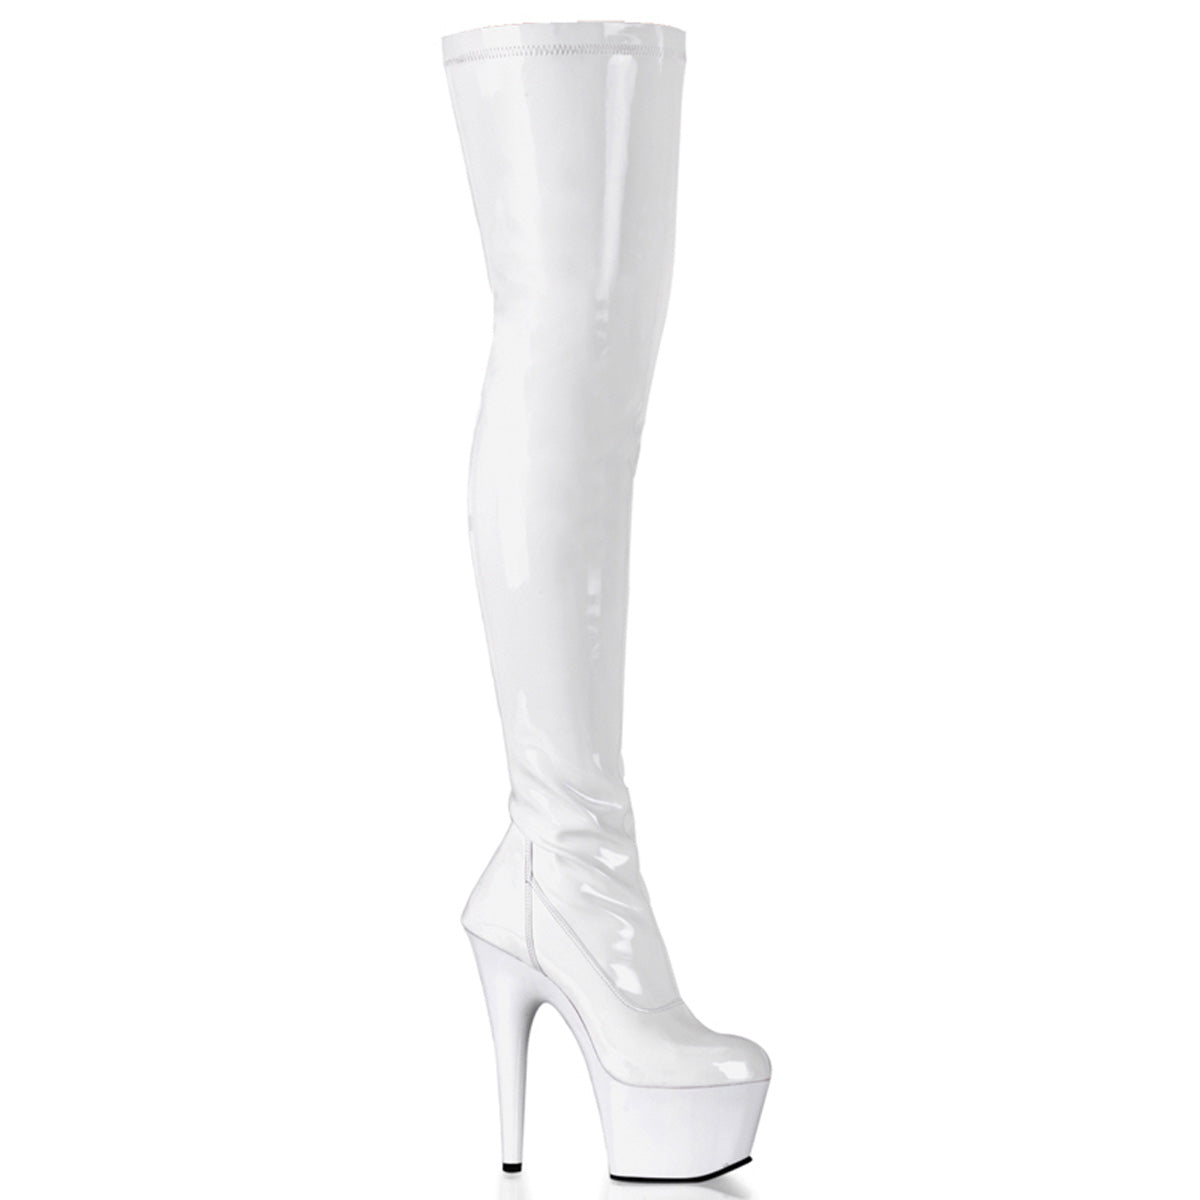 The white patent leather Adore Thigh High Boot.